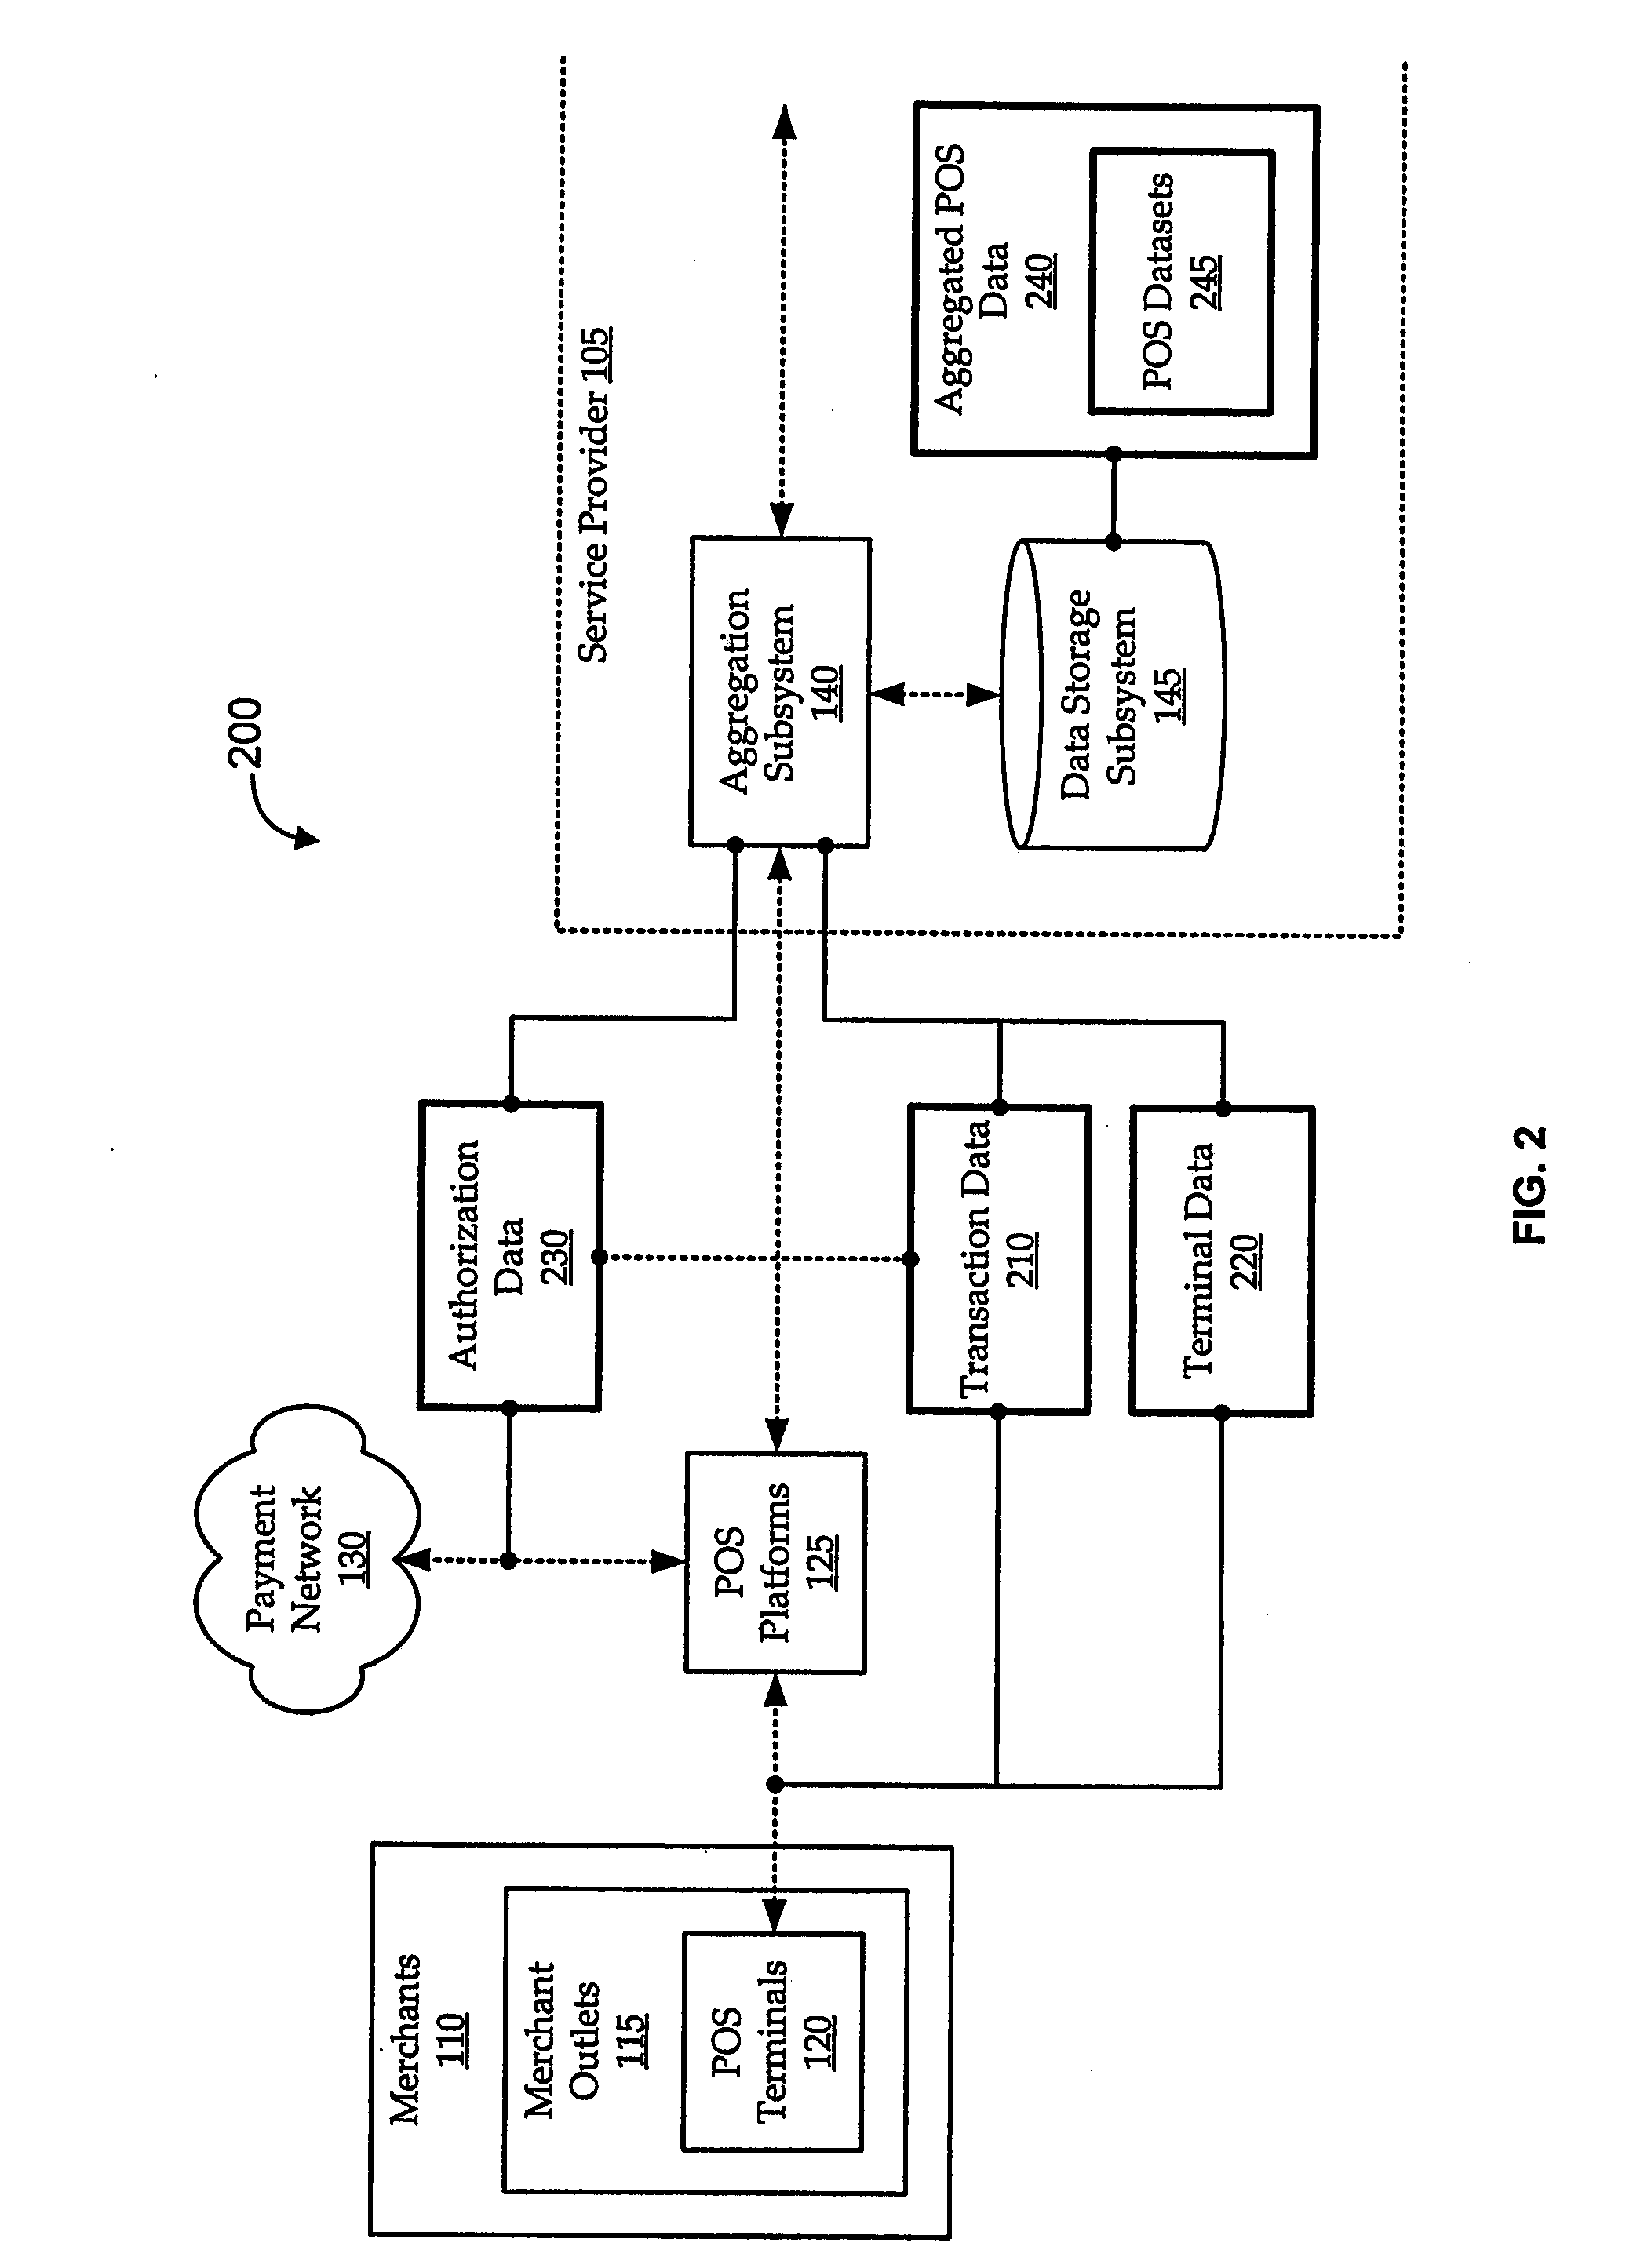 Transaction location analytics systems and methods